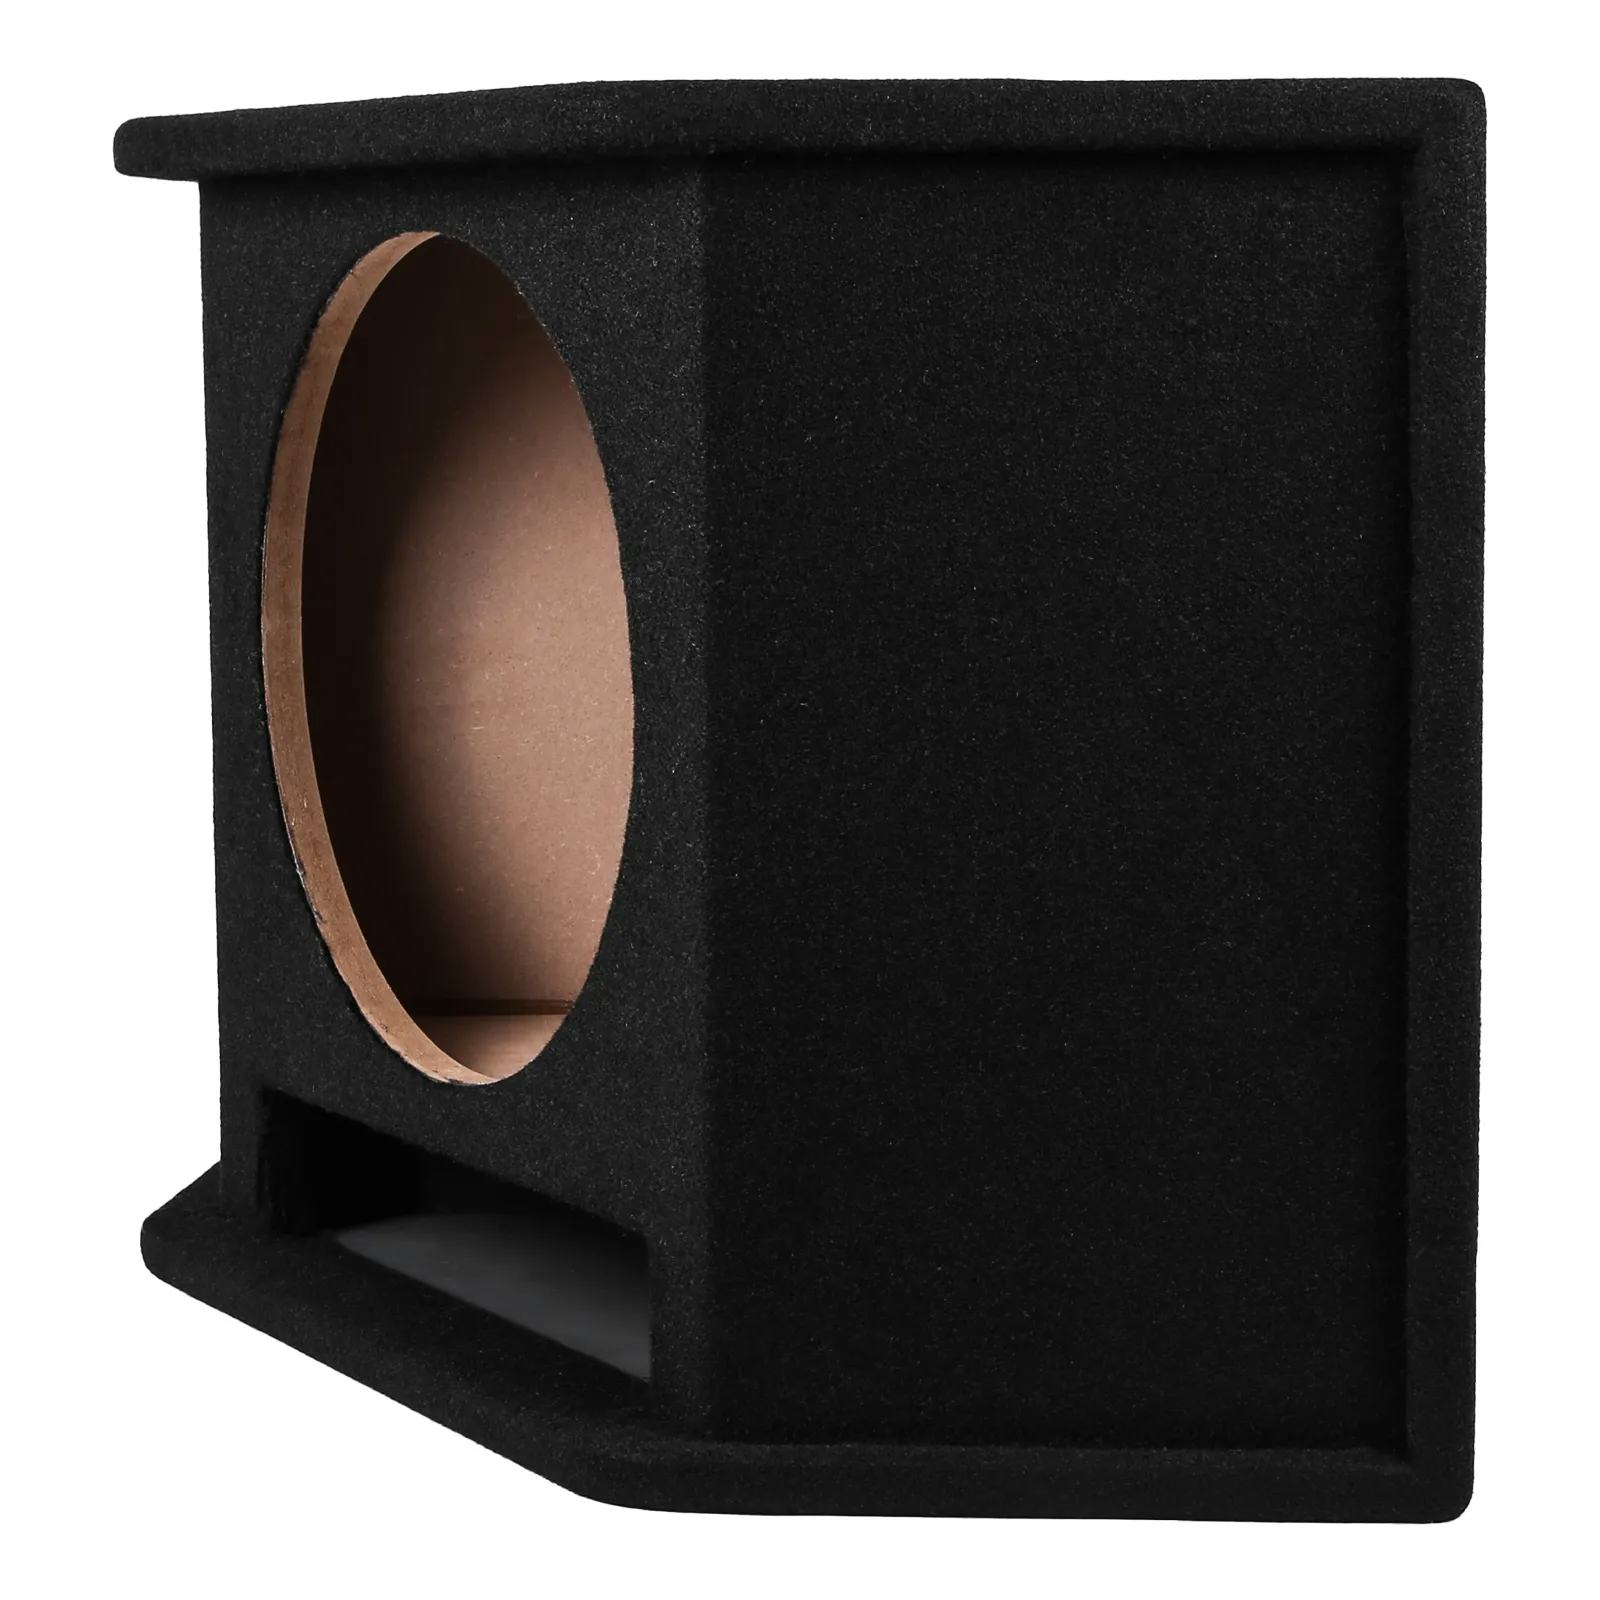 Triple 12" Ported Universal Fit Subwoofer Box #5